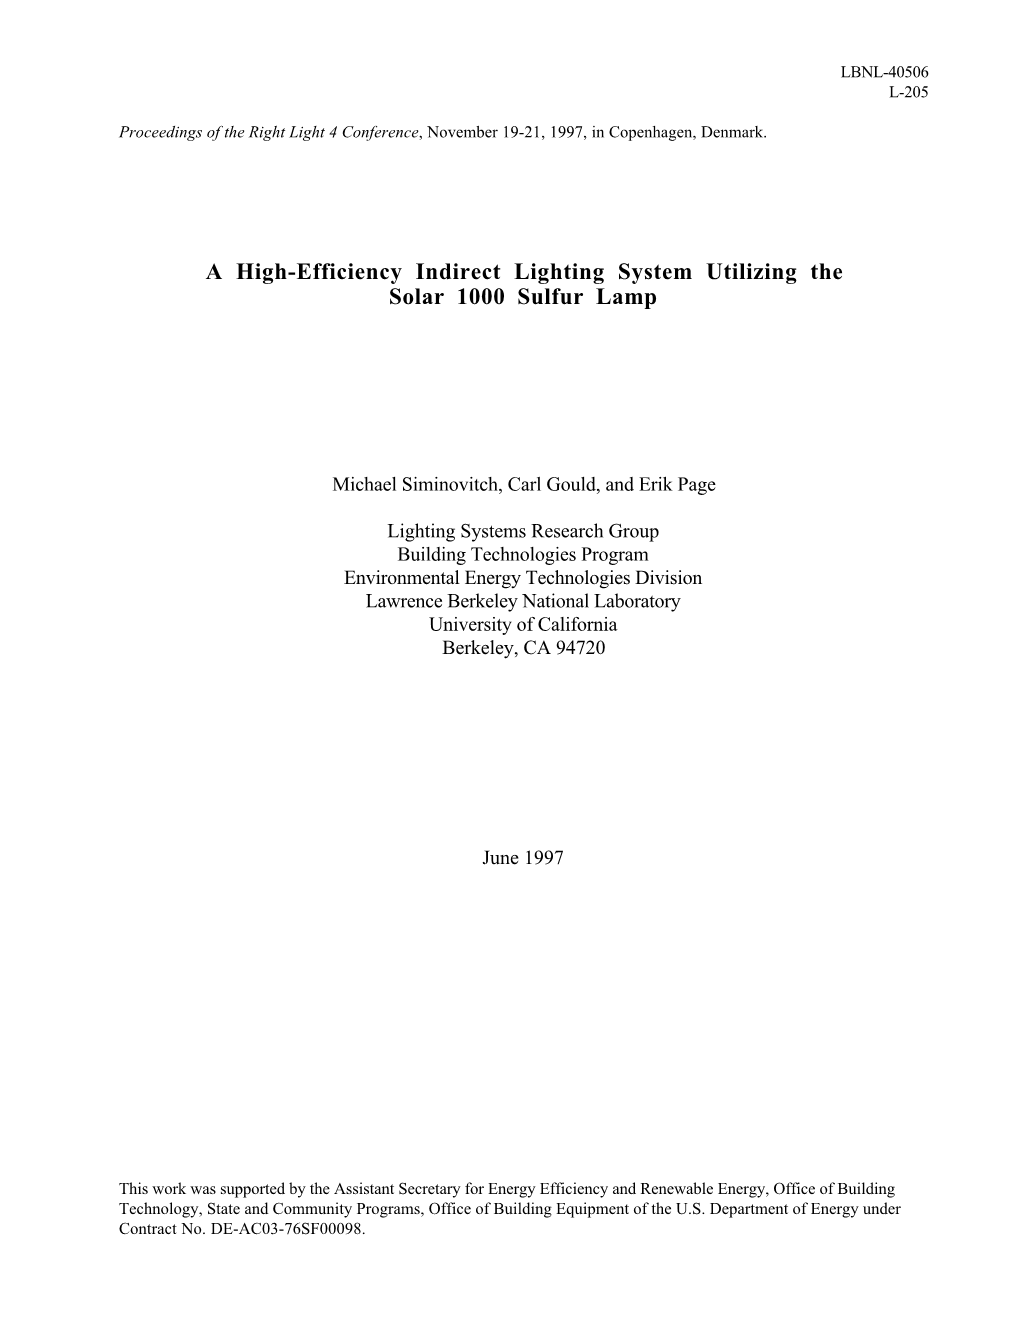 A High-Efficiency Indirect Lighting System Utilizing the Solar 1000 Sulfur Lamp